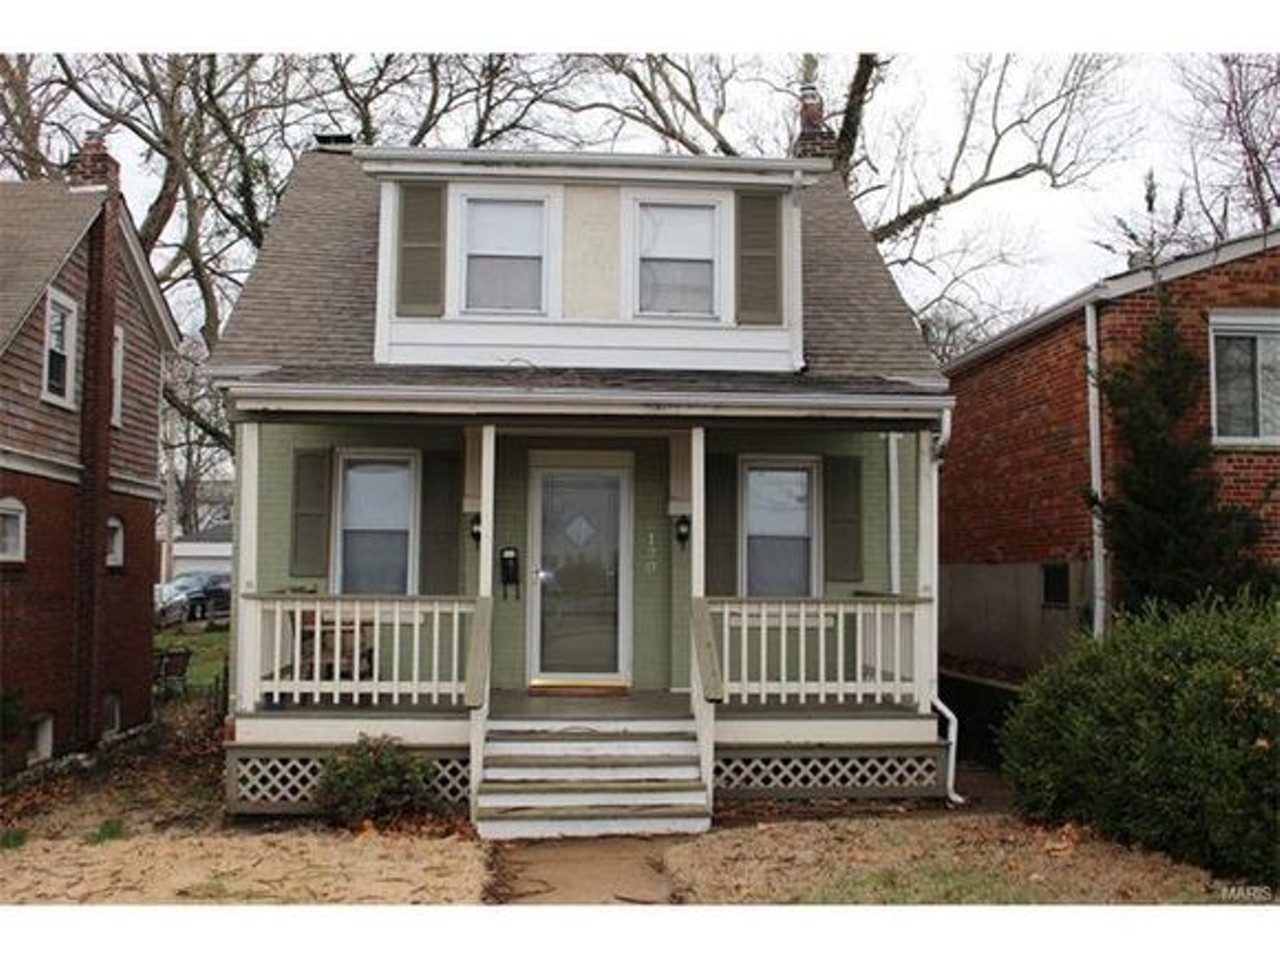 6120 Berthold Avenue
St Louis, MO , 63139
$179,000
2 beds / 3 baths
Seven minute walk to Forest Park. Directions here.
In addition to Forest Park, this house is a stone's throw away from Mike Talayna's and Courtesy Diner.